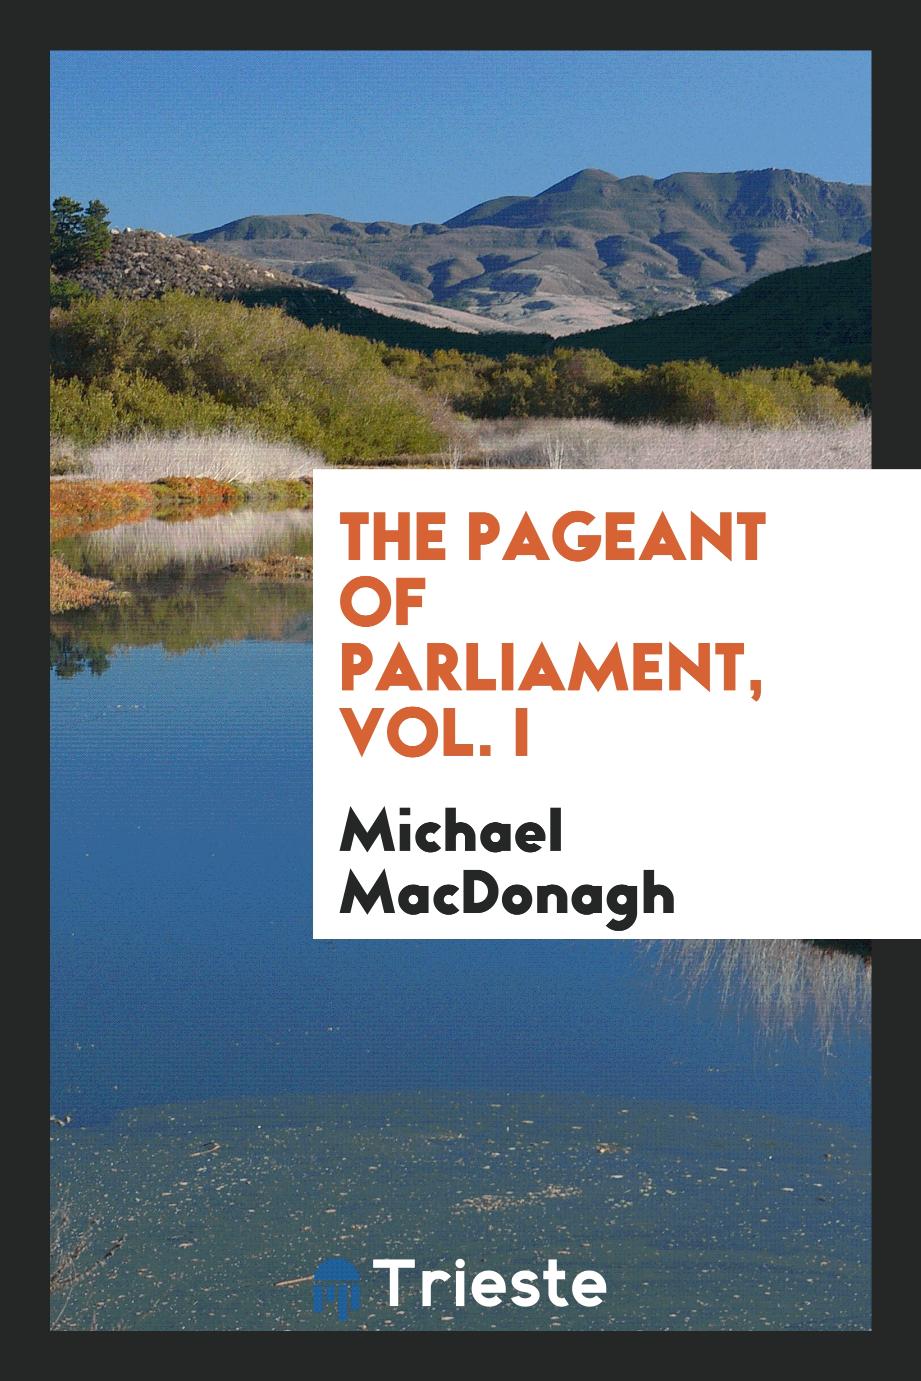 The pageant of Parliament, vol. I